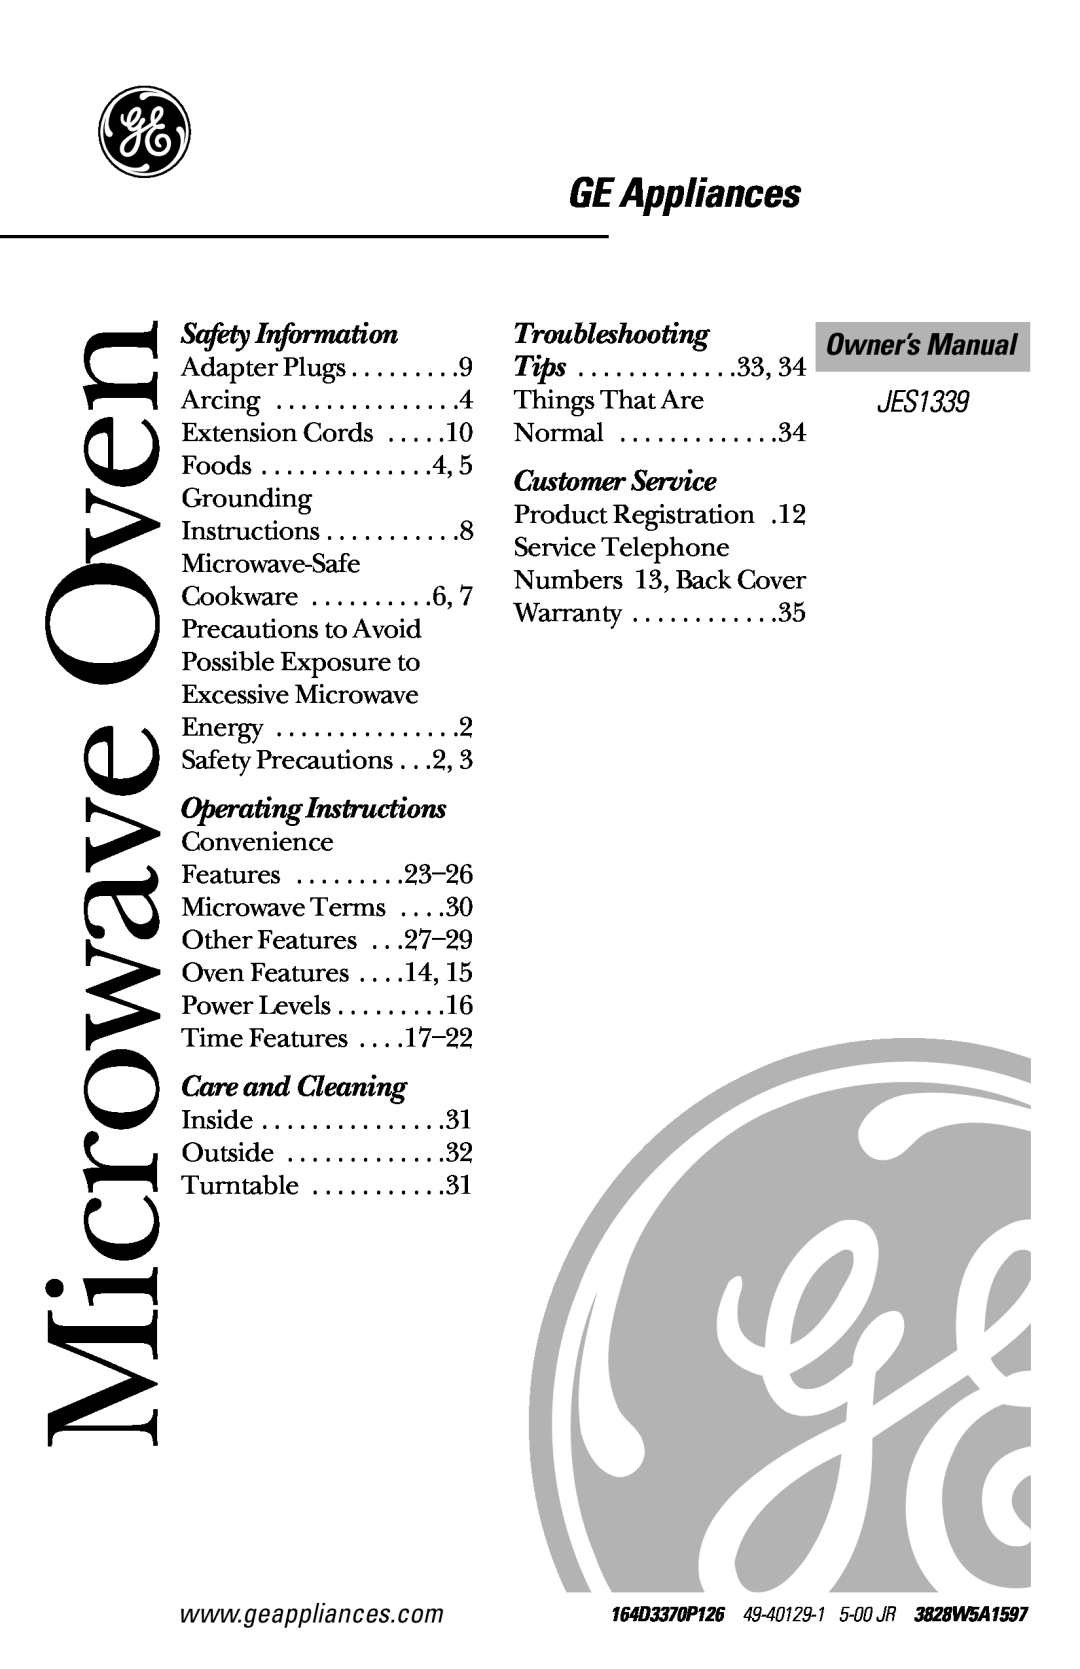 GE JES1339 owner manual GE Appliances, Microwave Oven, Safety Information, Troubleshooting, Customer Service 